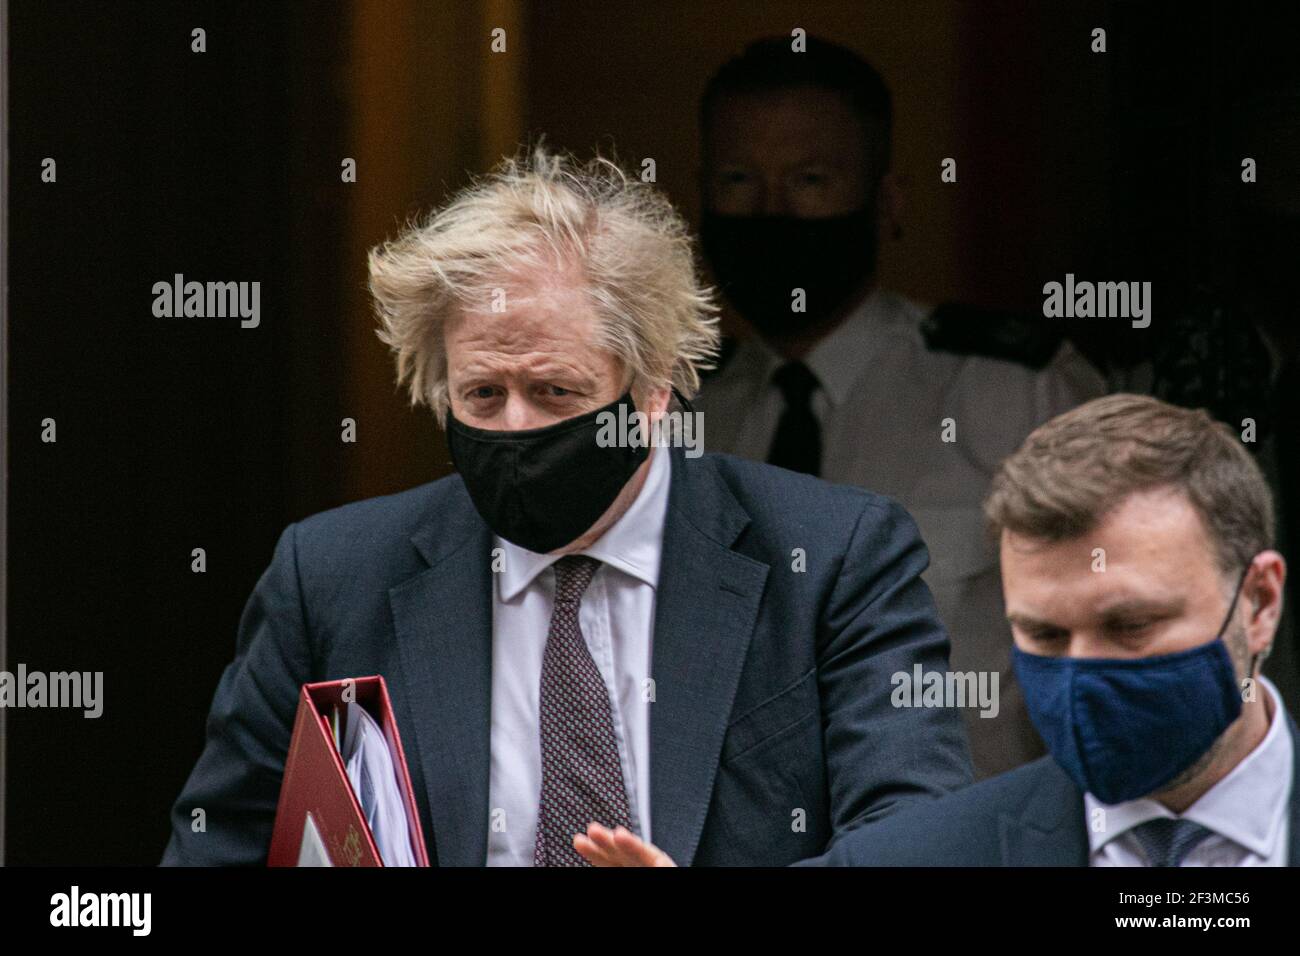 WESTMINSTER  LONDON, UK 17 March 2021. Prime Minister Boris Johnson wearing a protective facemask departs from 10 Downing Street for Parliament to attend the weekly PMQs Prime Minister Questions as his government plans to introduce new powers to crack down on protests.  MPs have voted to pass the  Police, Crime, Sentencing and Courts Bill at  the second reading after two days of debate in the House of Commons. Credit amer ghazzal/Alamy Live News Stock Photo